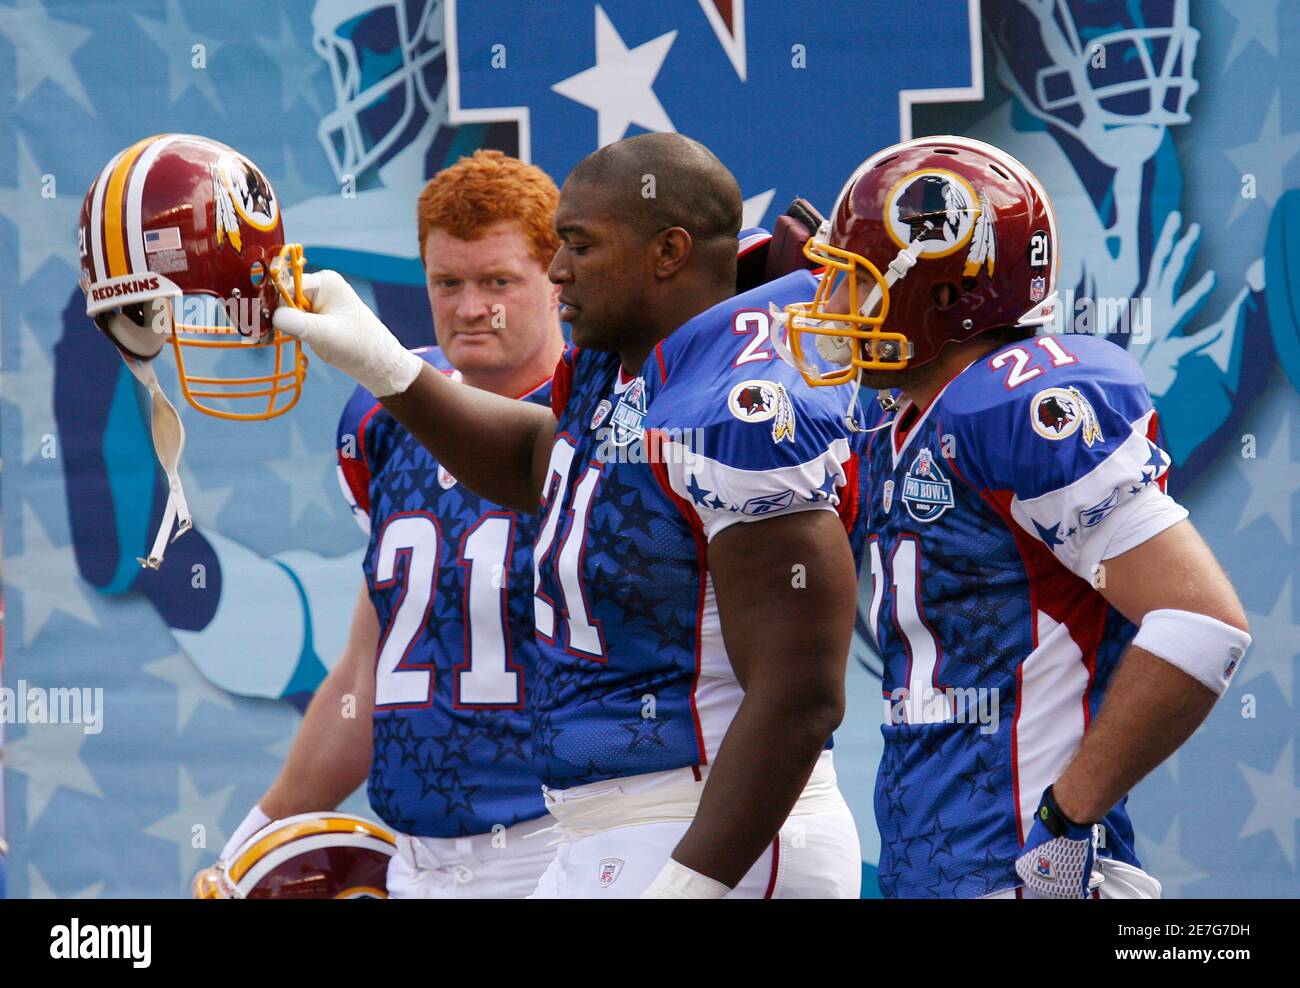 NFC Washington Redskins players (L-R) Ethan Albright, Chris Cooley and  Chris Samuels wear the #21 jersey in memory of slain Redskins player Sean  Taylor during the NFL Pro Bowl at Aloha Stadium